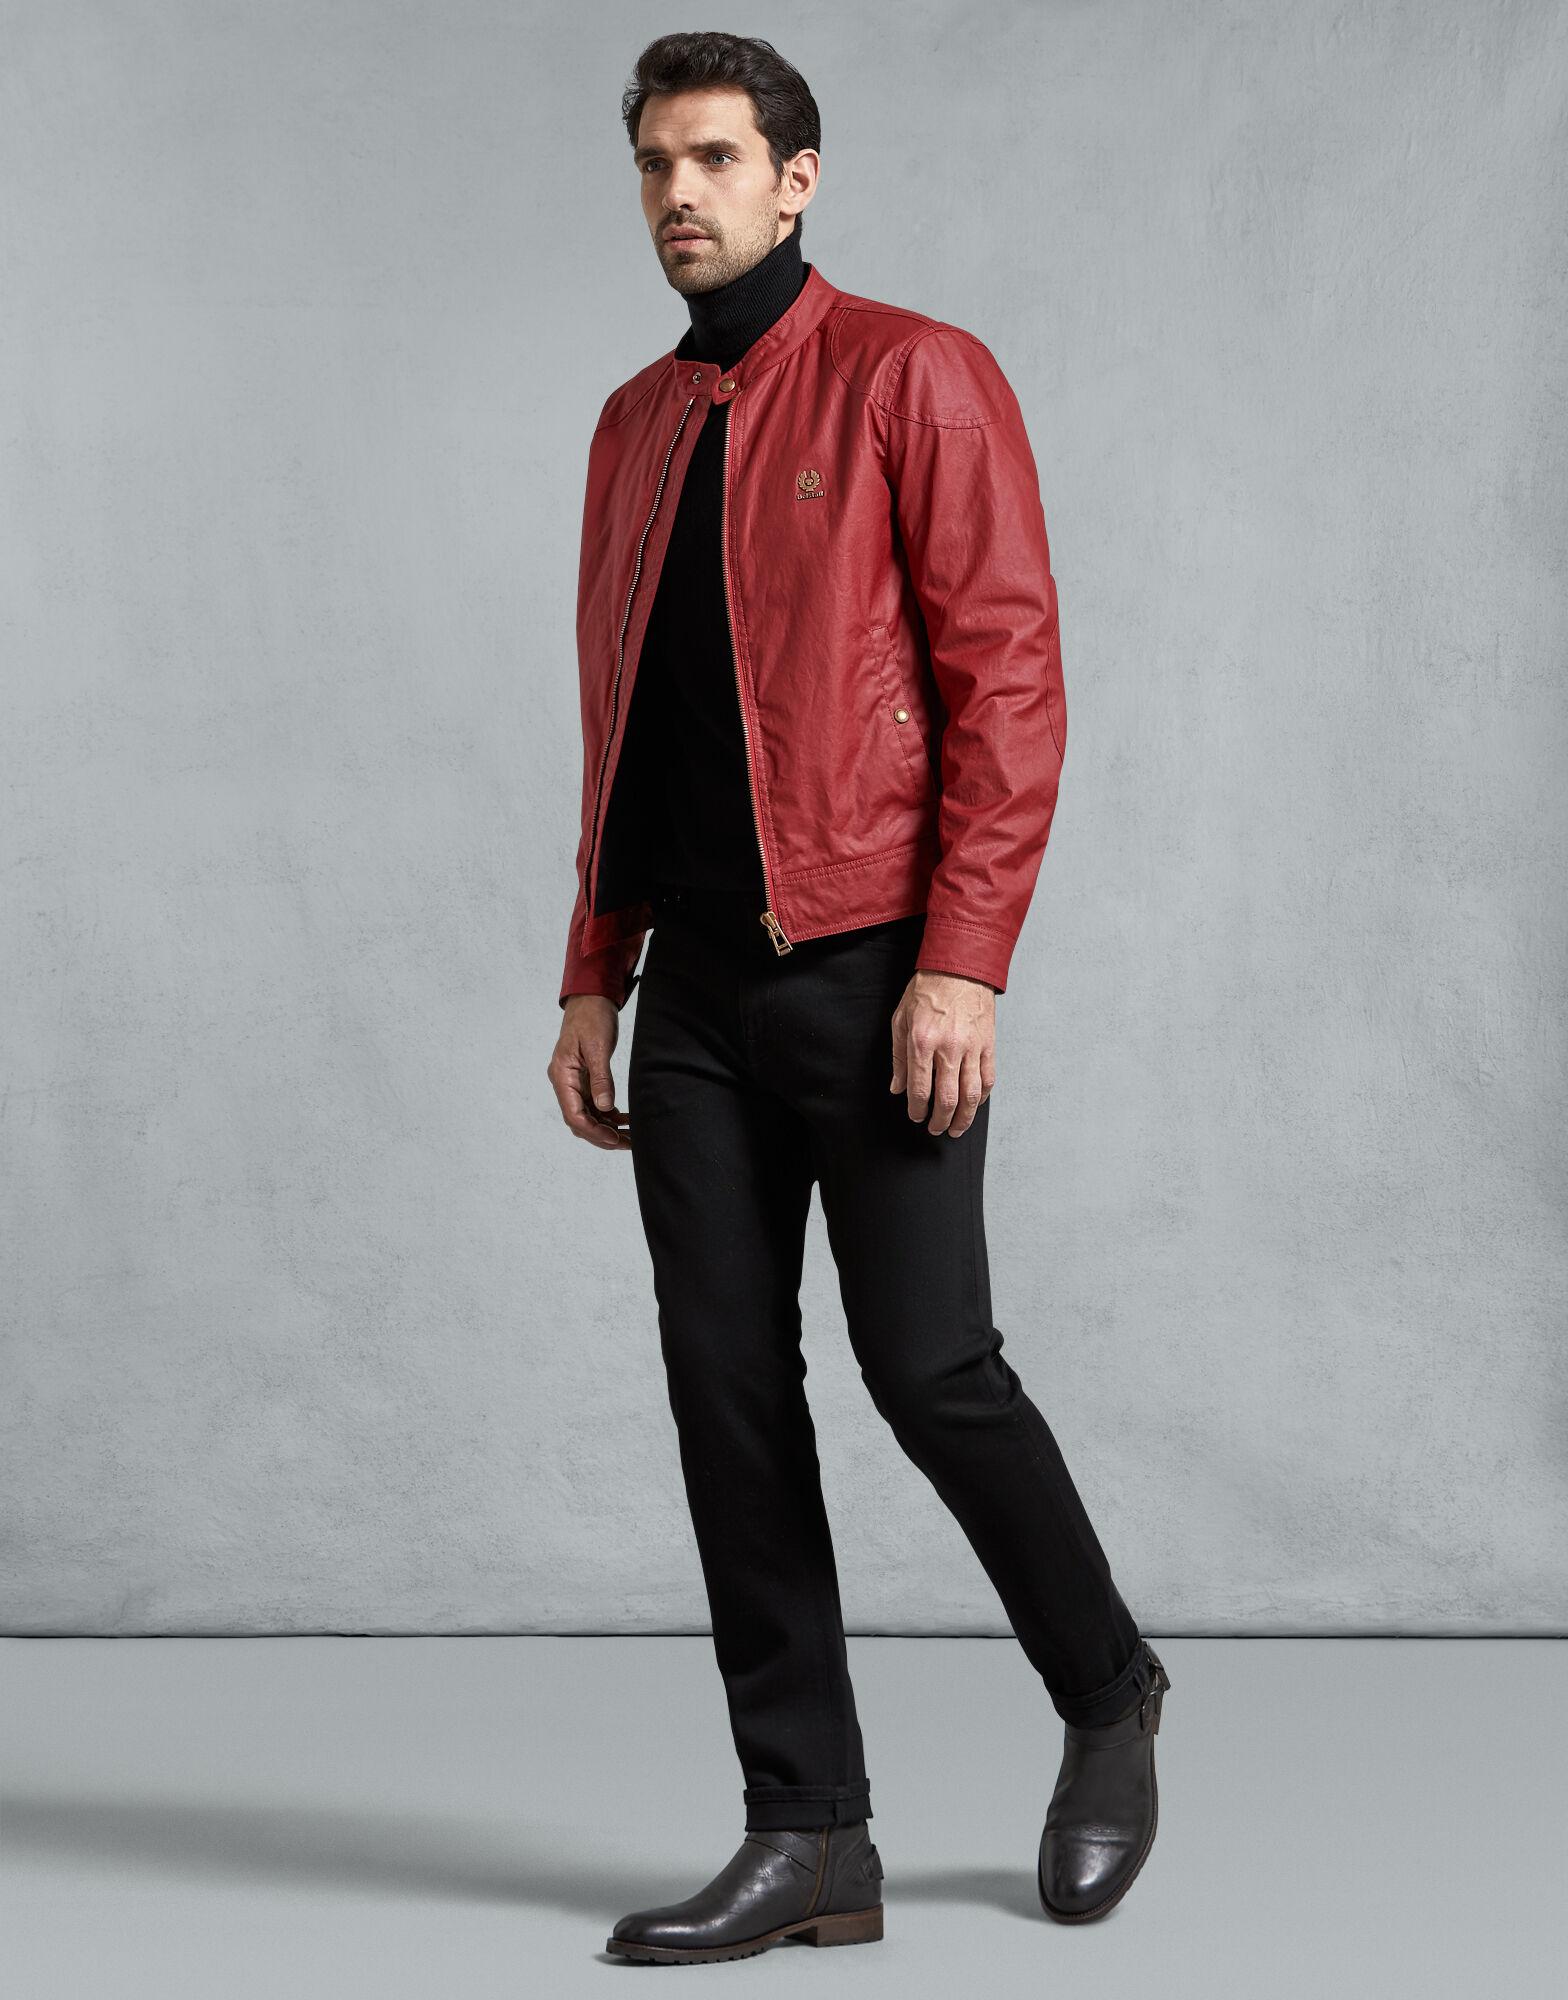 Belstaff Cotton Kelland Waxed Jacket in Racing Red (Red) for Men - Lyst